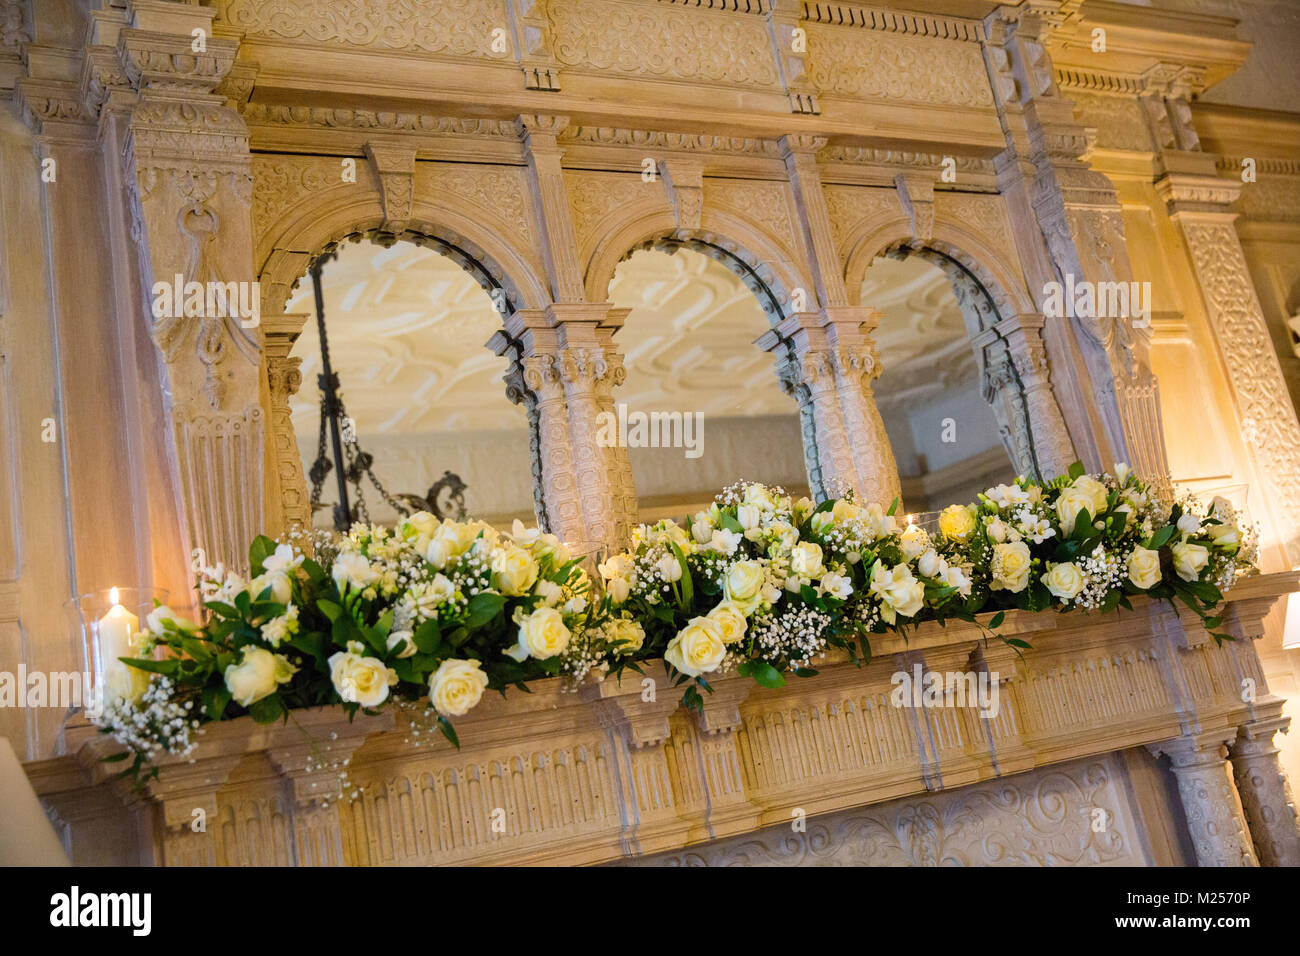 Romantic floral arrangement on ornate mantlepiece with wall mirrors Stock Photo